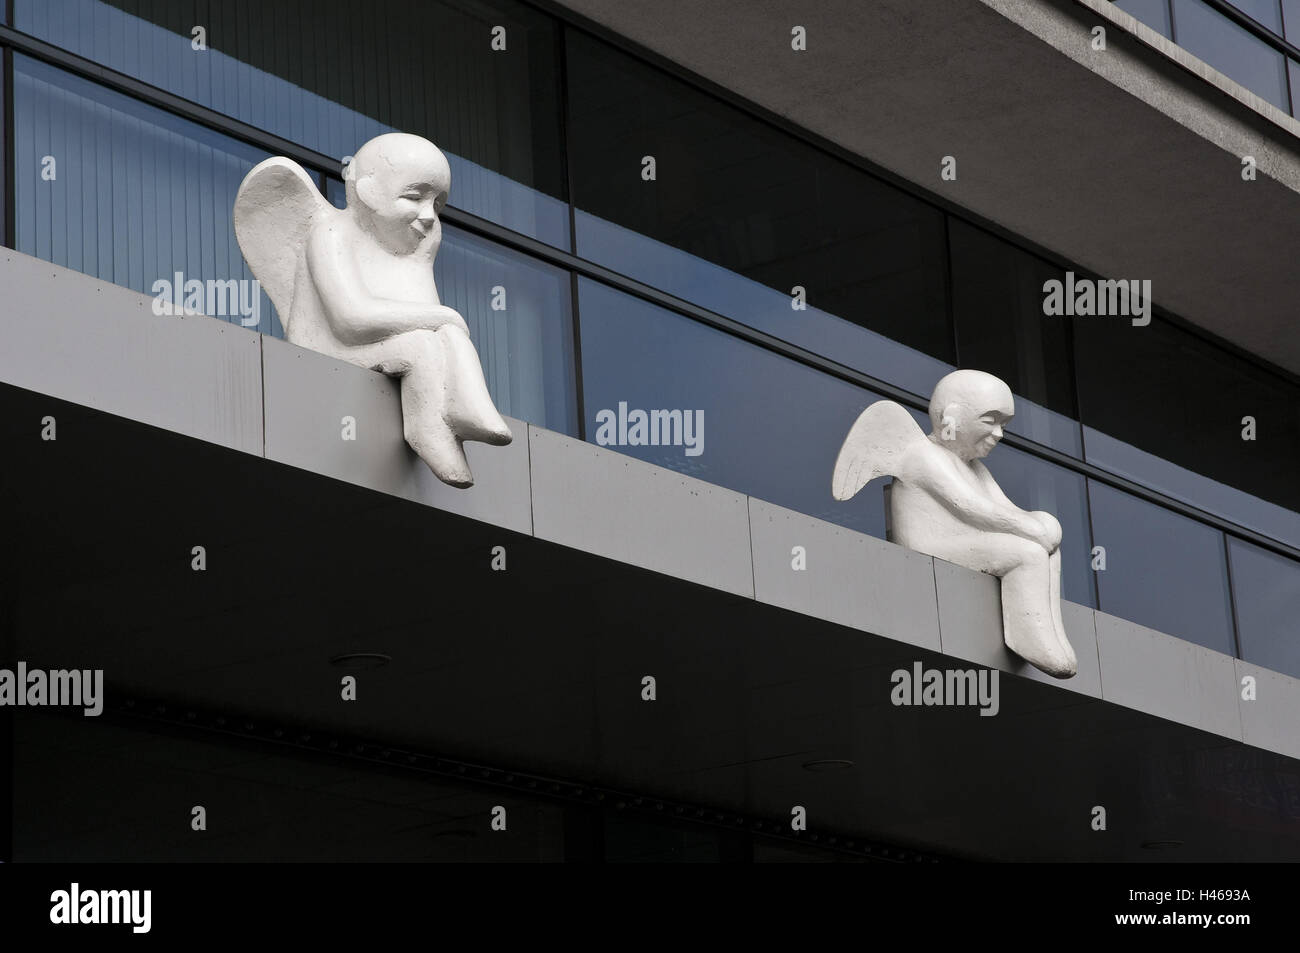 Lithuania, Vilnius, Svitrigailos street, projecting roof, figures, guardian angels, Stock Photo